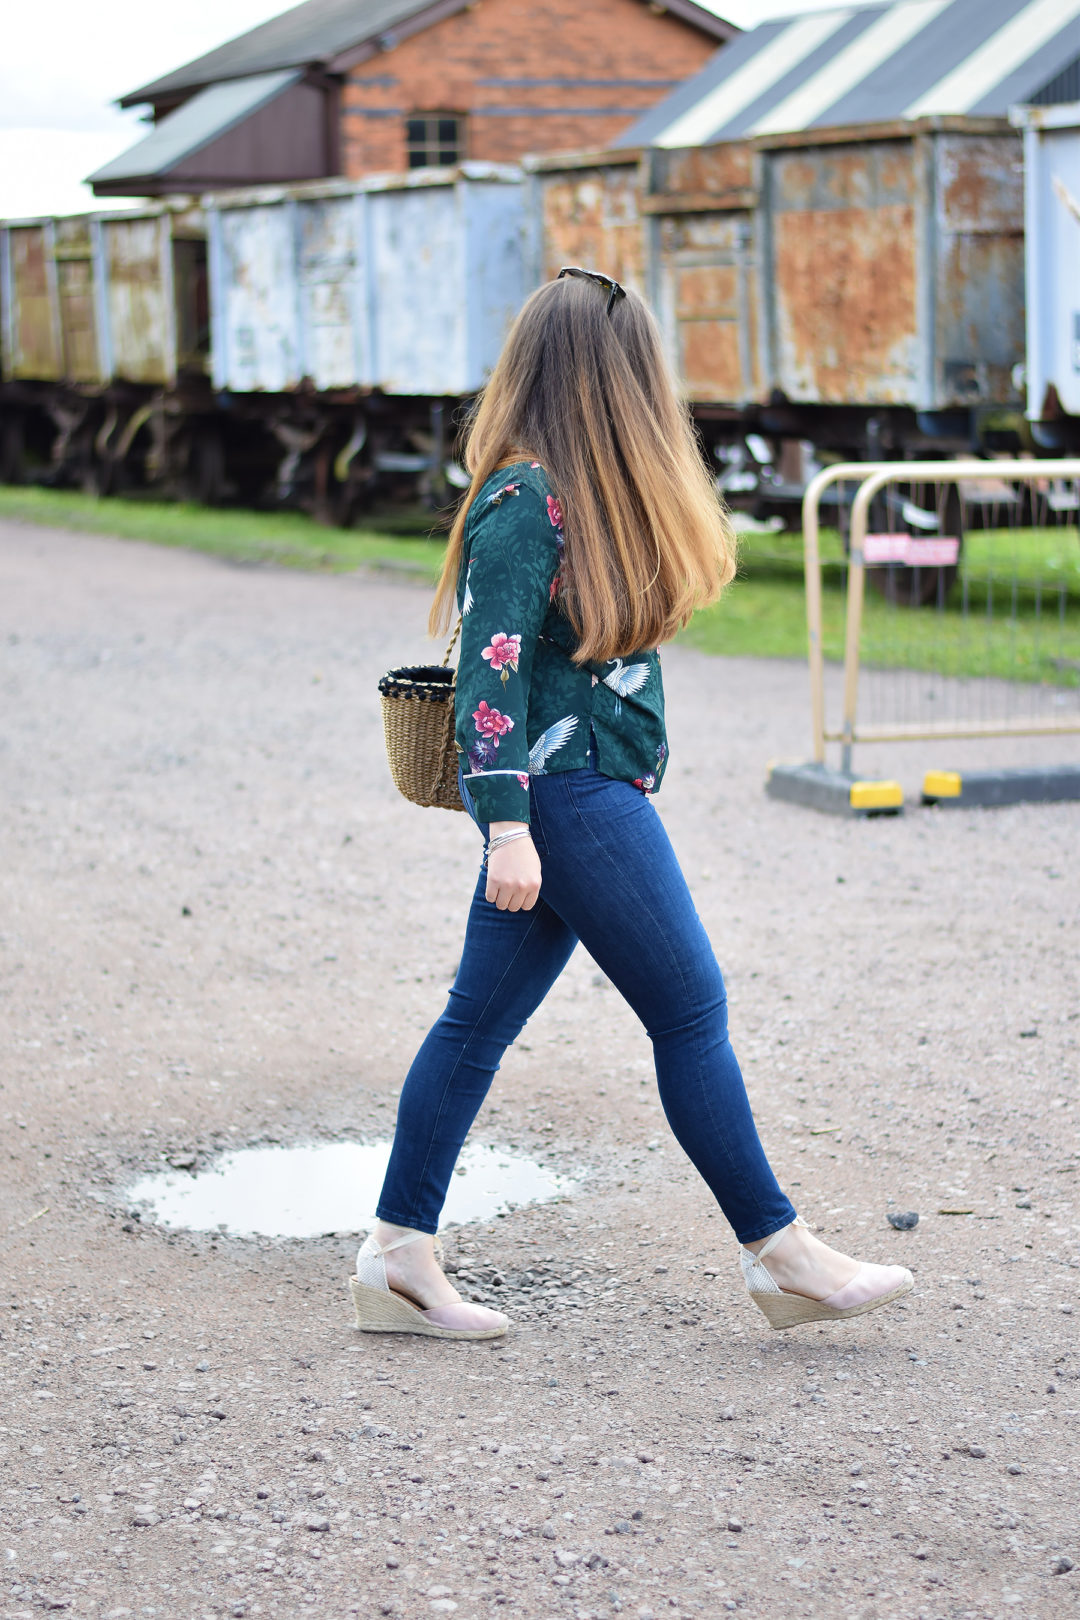 ZARA HIGH RISE SKINNY JEANS OUTFIT